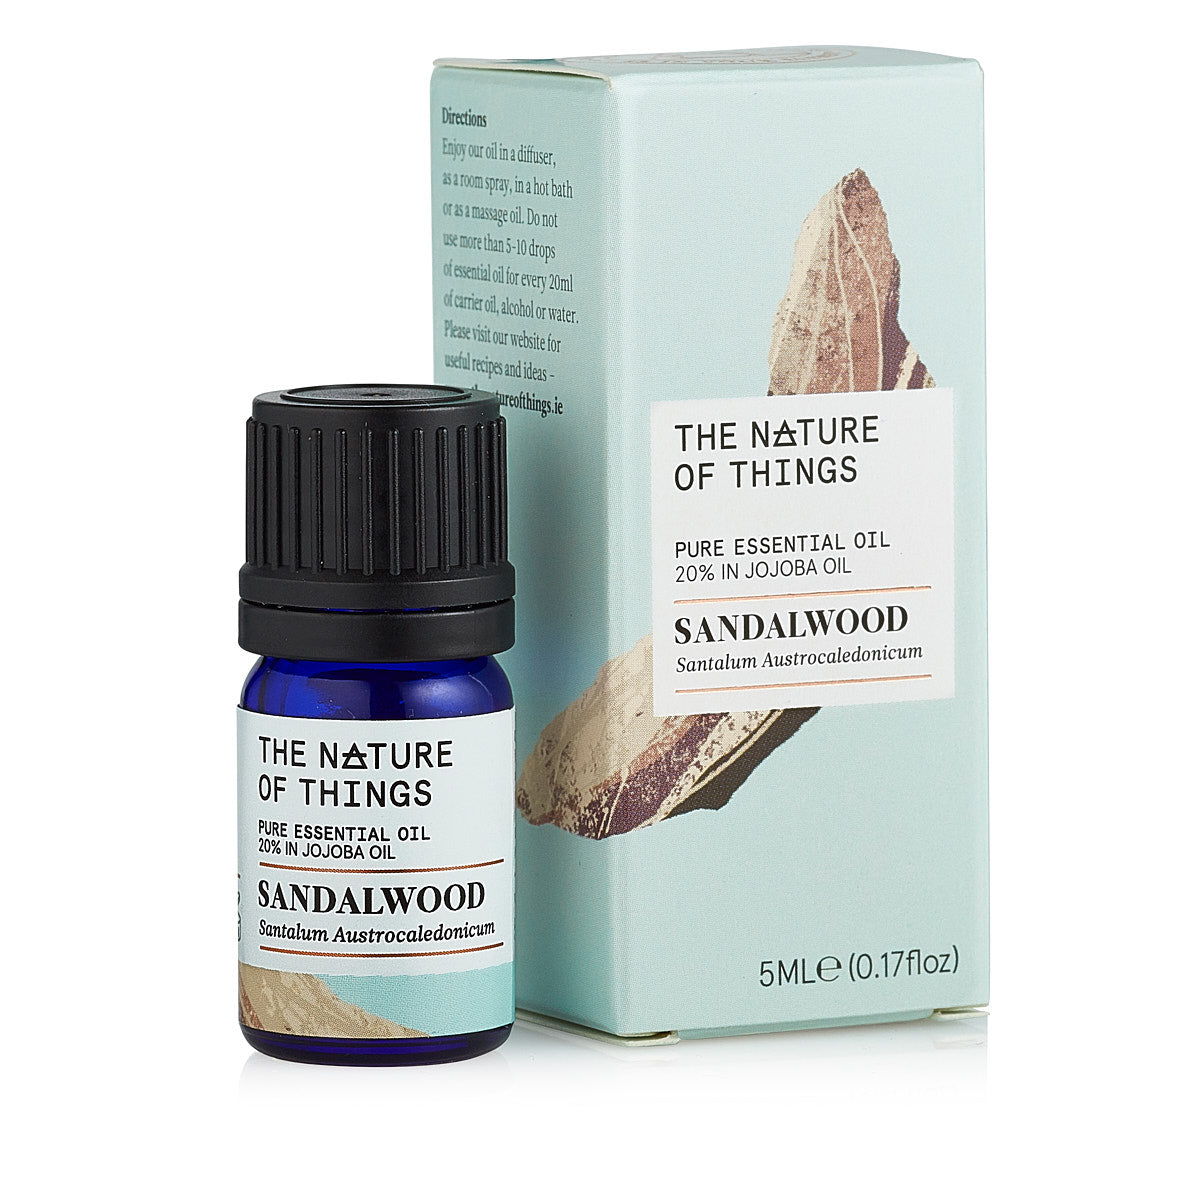 Sandalwood Oil from The Nature of Things